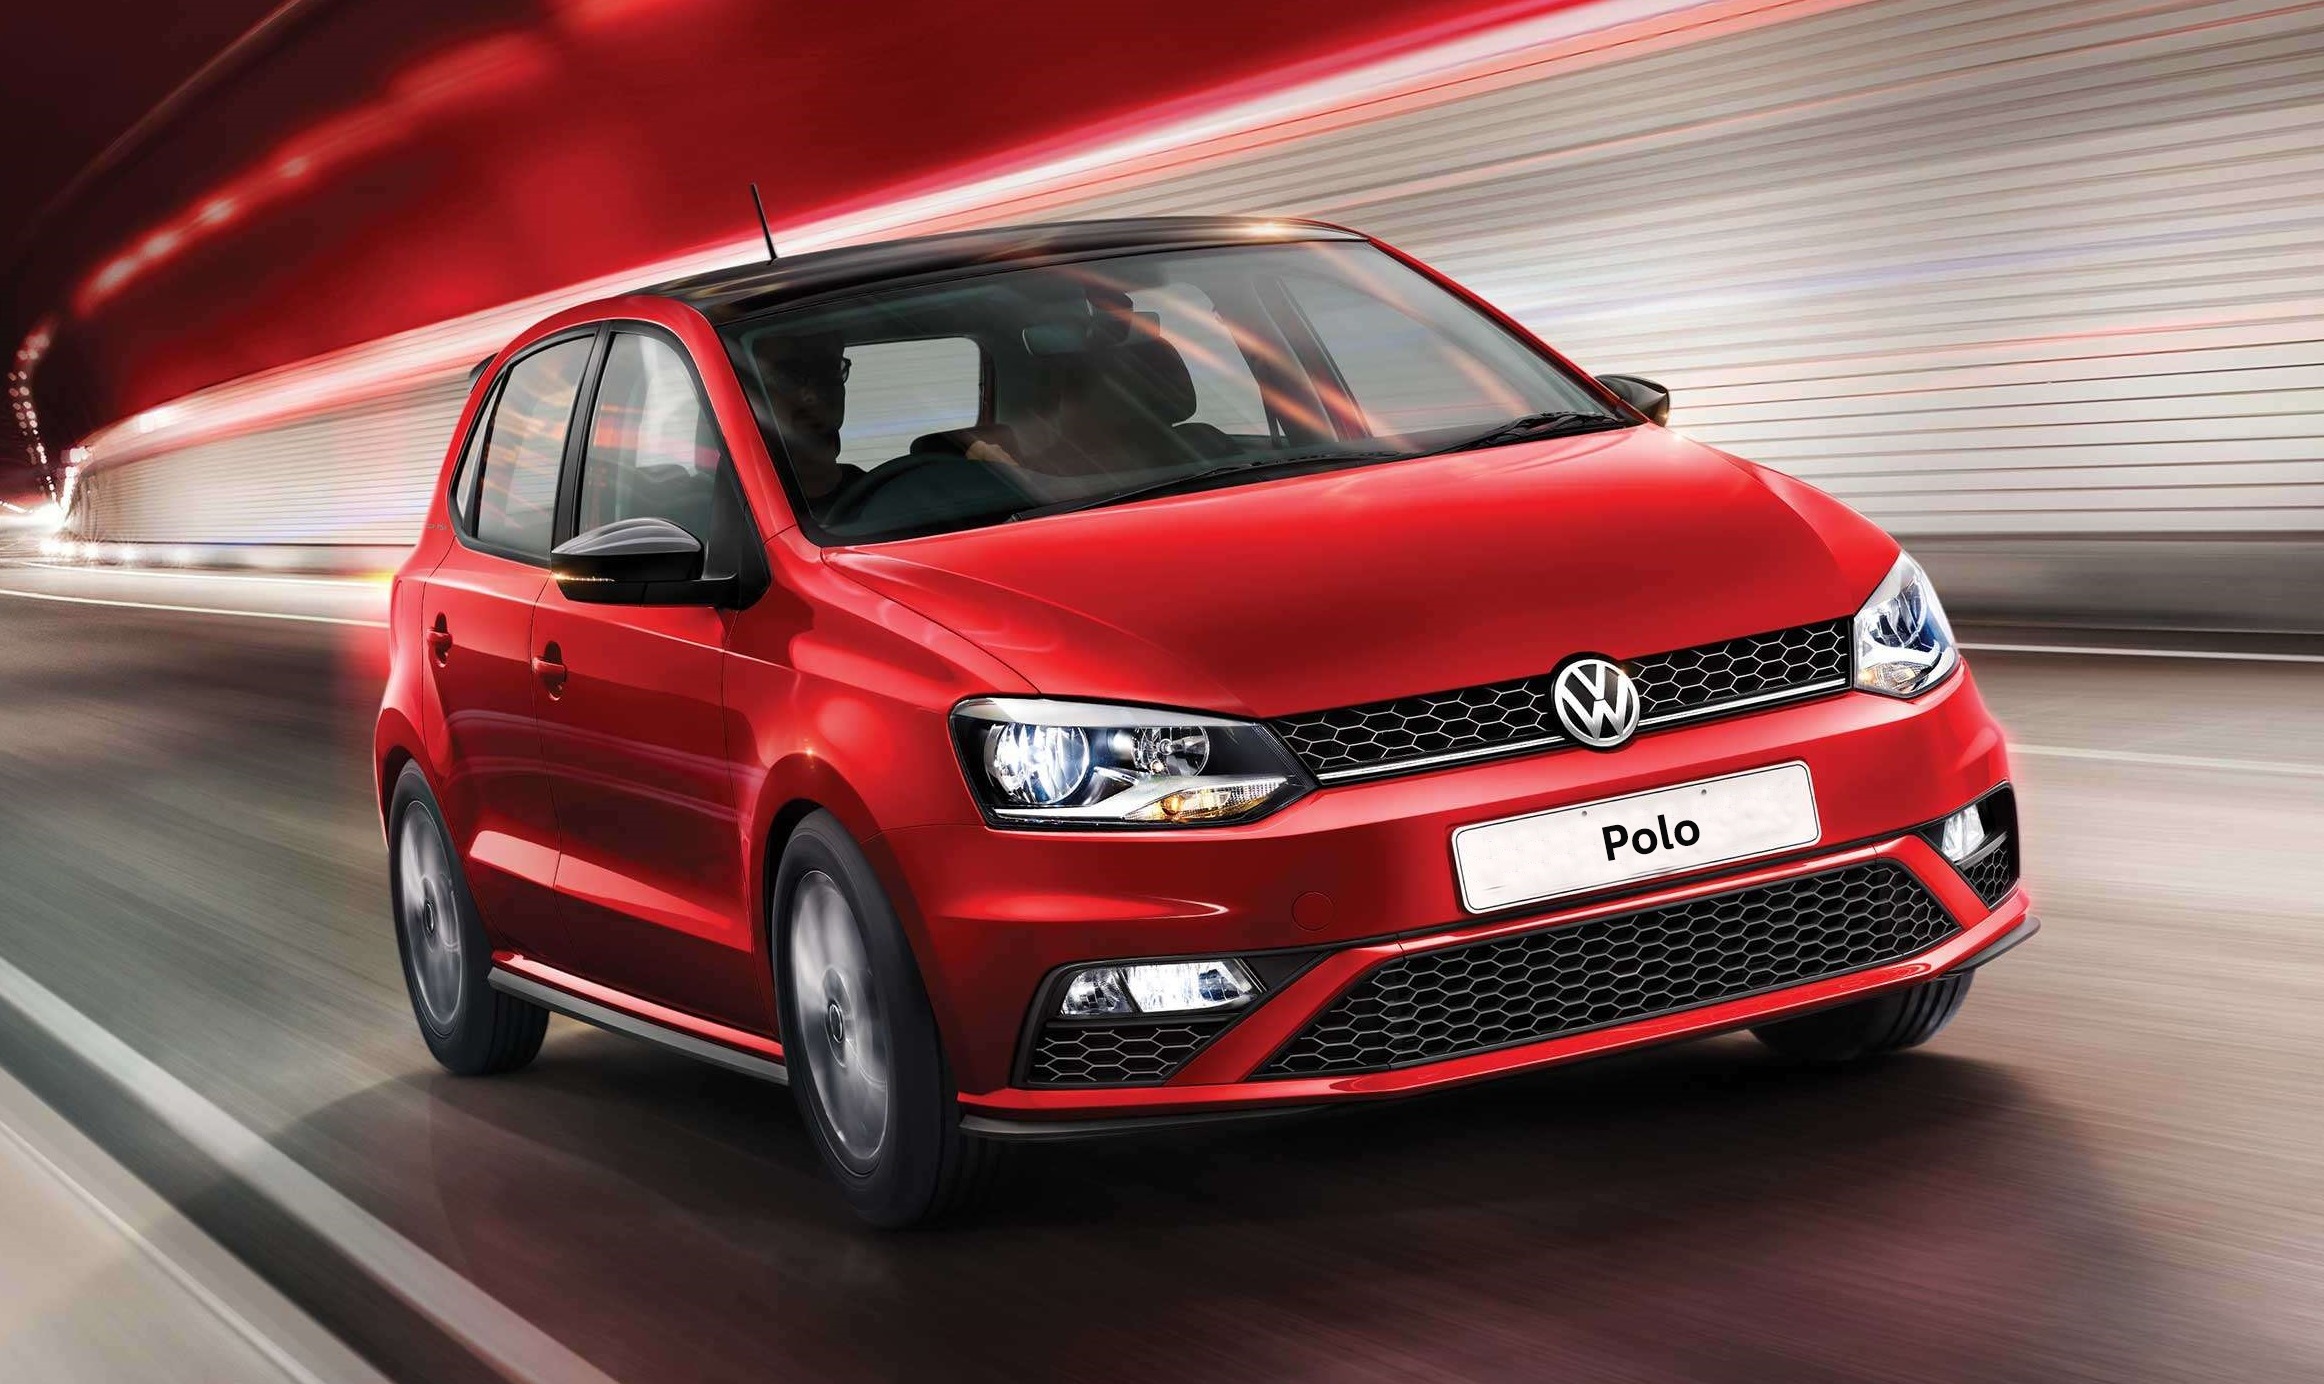 Volkswagen Polo – Power to Play